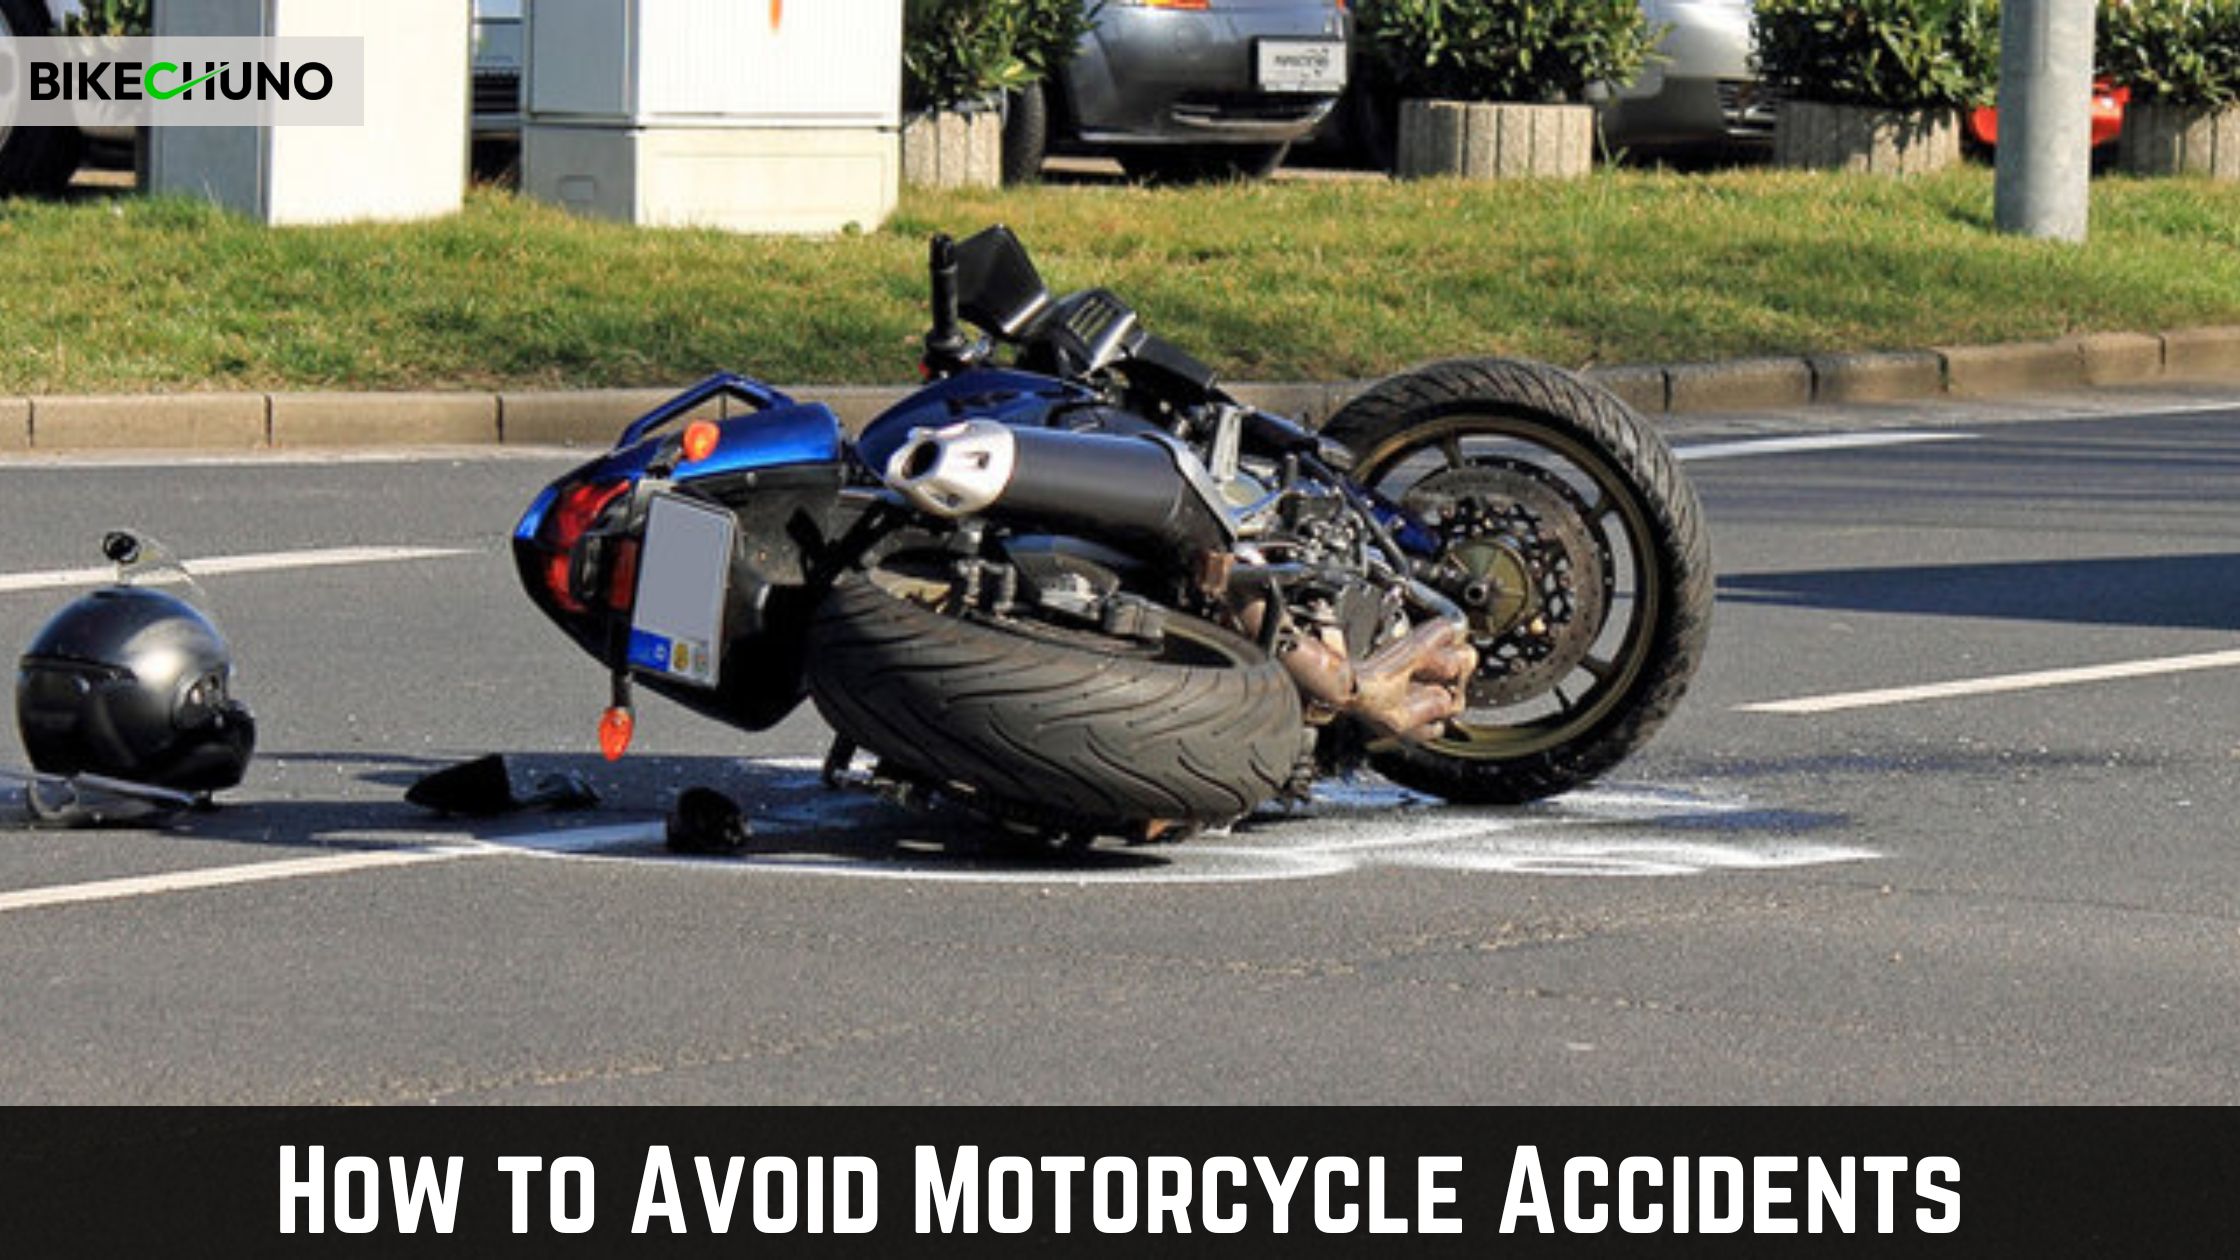 How to Avoid Motorcycle Accidents